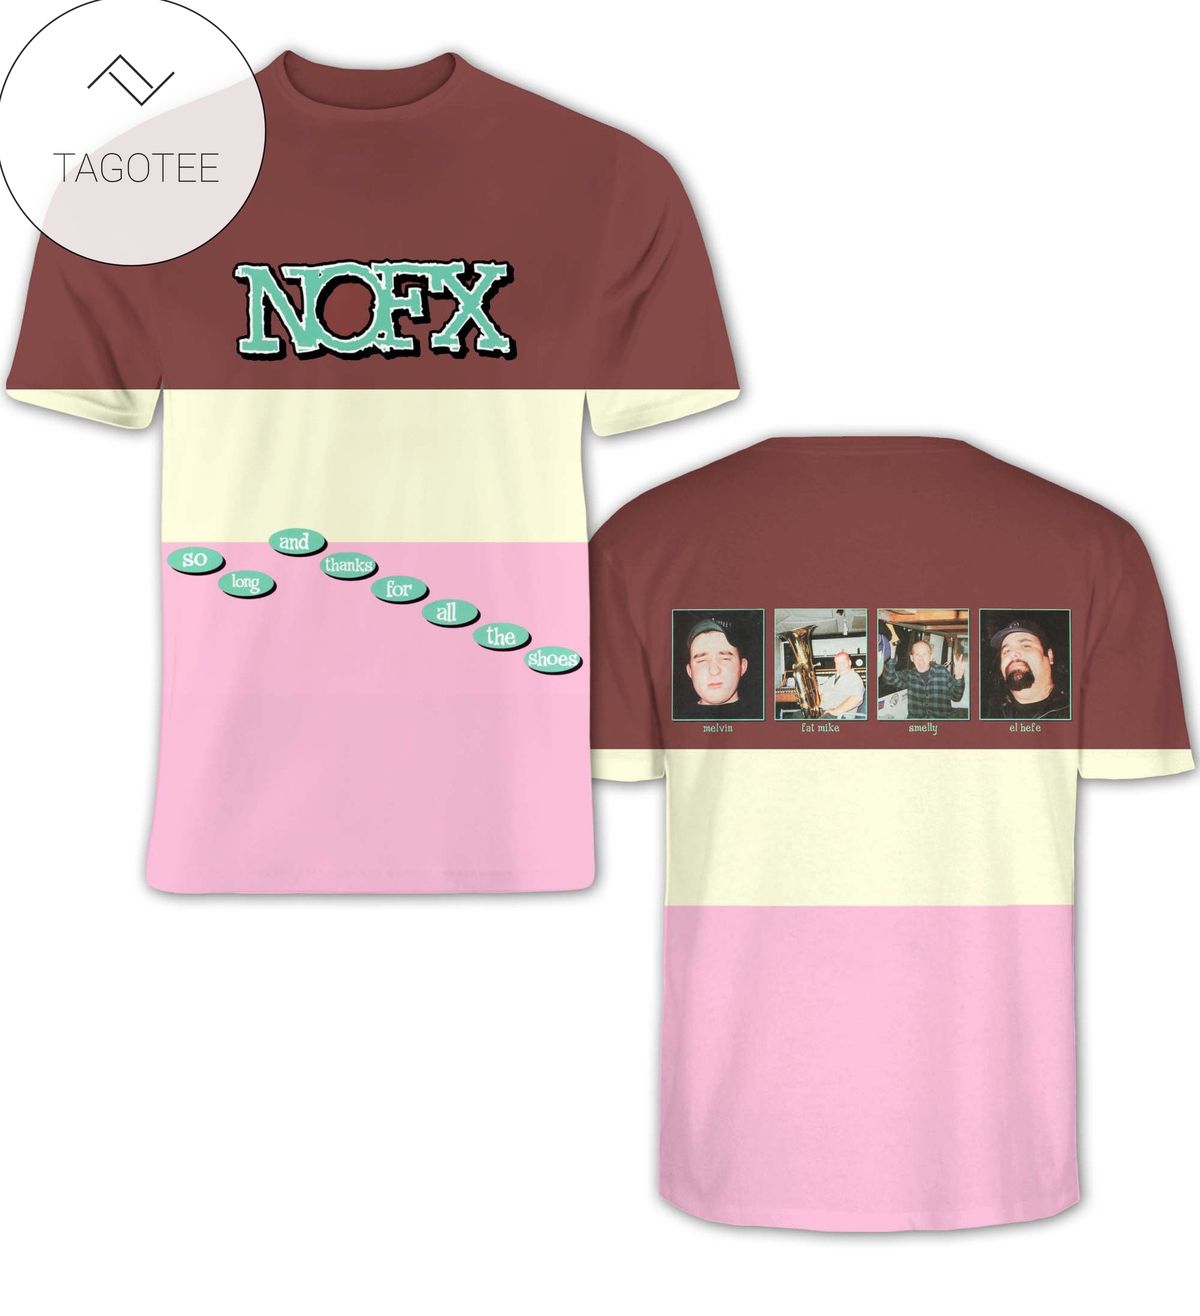 Nofx So Long And Thanks For All The Shoes Album Cover Shirt